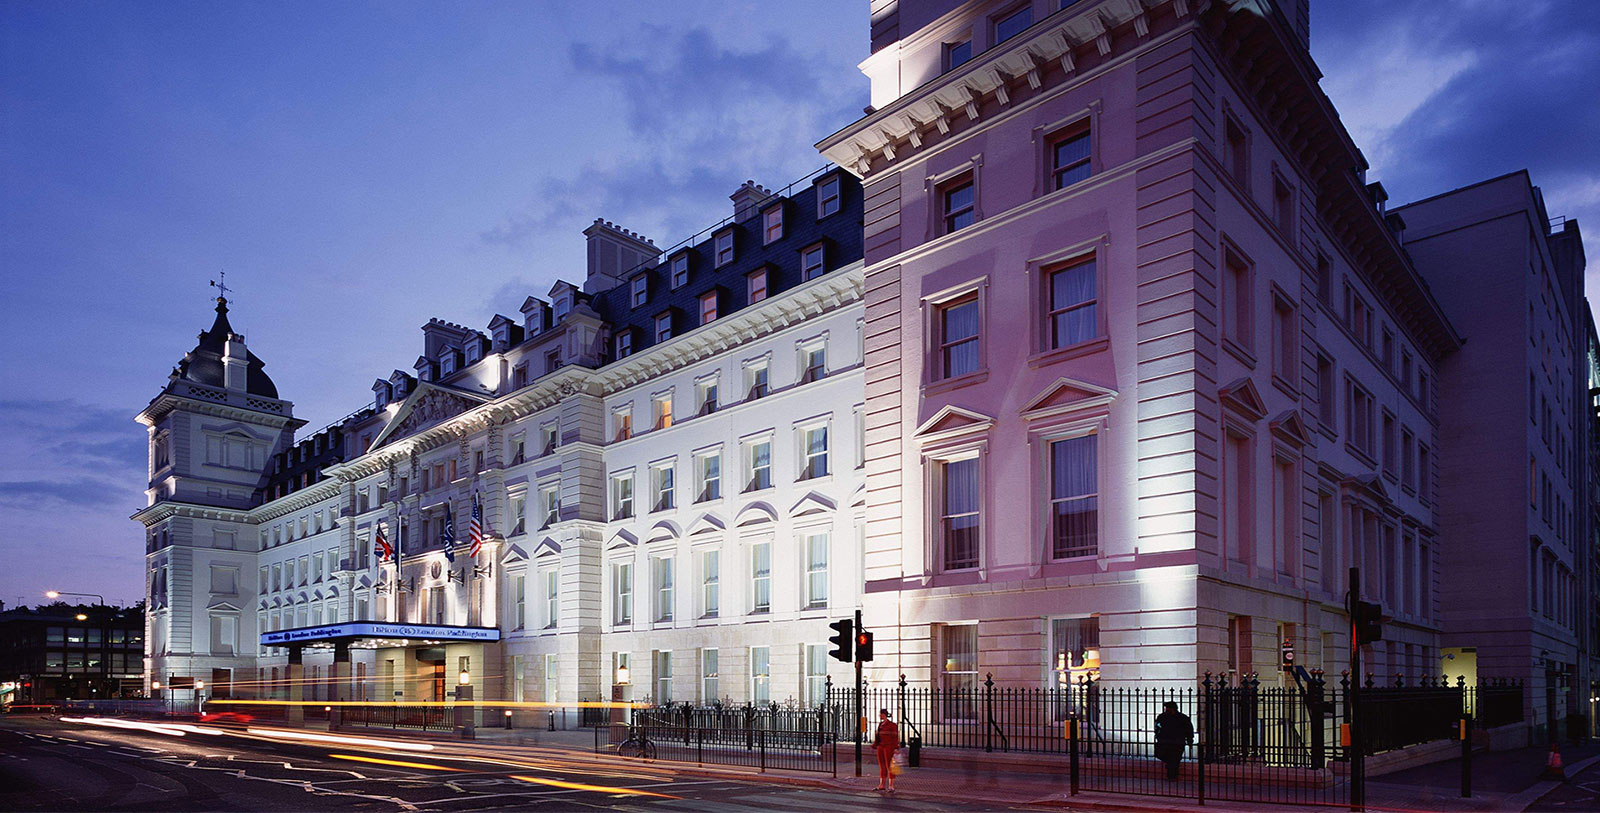 Image of Exterior at Night, Hilton London Paddington, United Kingdom, 1854, Member of Historic Hotels Worldwide, Special Offers, Discounted Rates, Families, Romantic Escape, Honeymoons, Anniversaries, Reunions